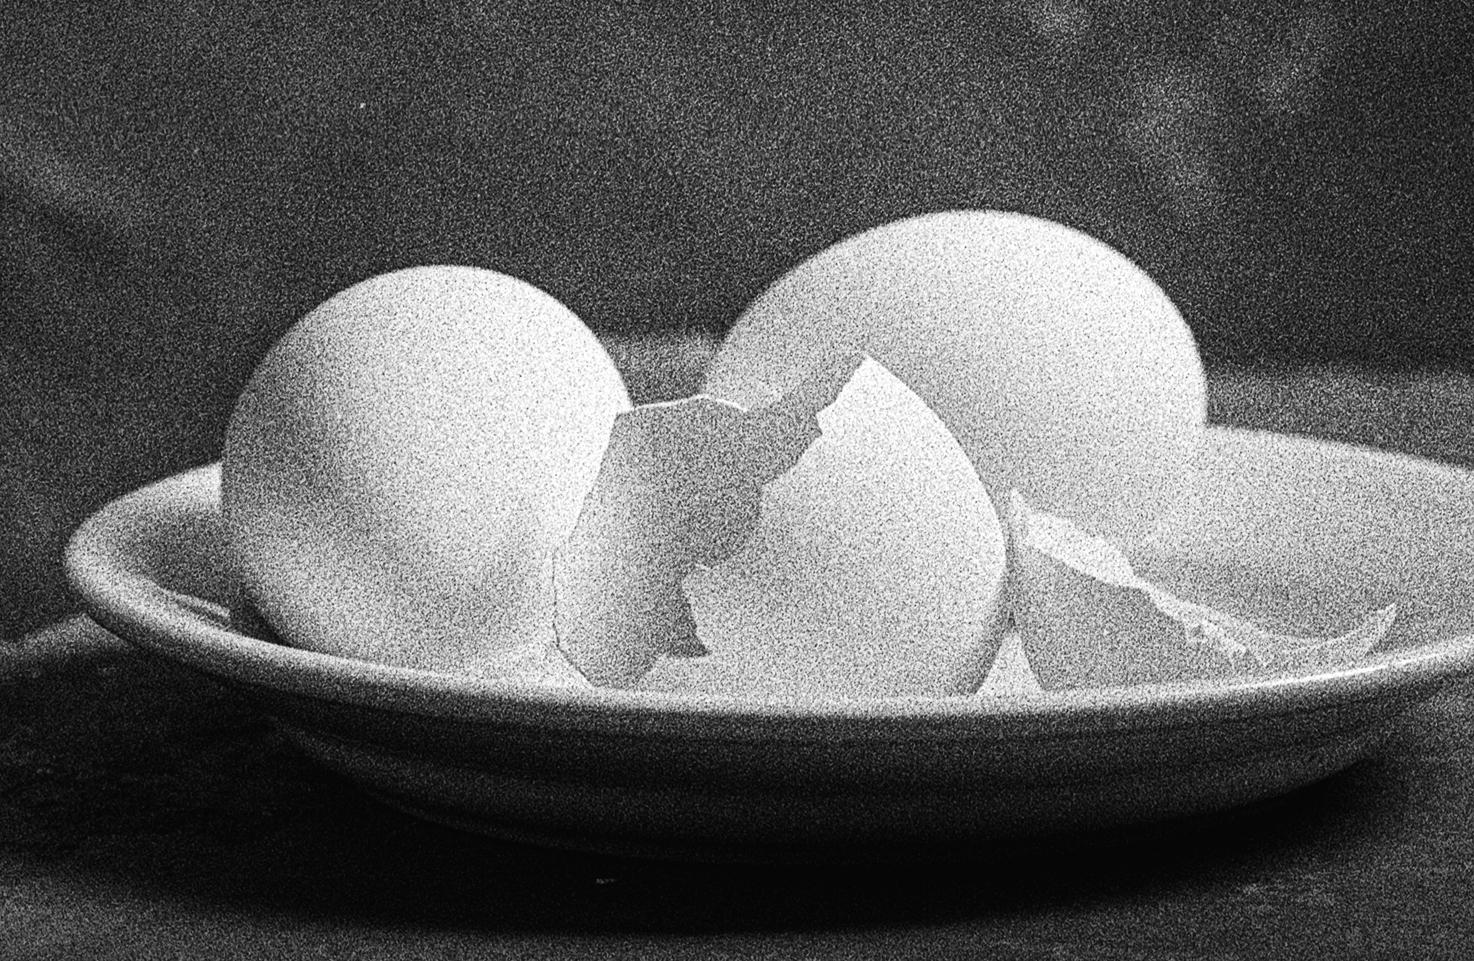 Egg Study 5. Still Life . Black and White Silver Gelatin Print - Photograph by Shine Huang